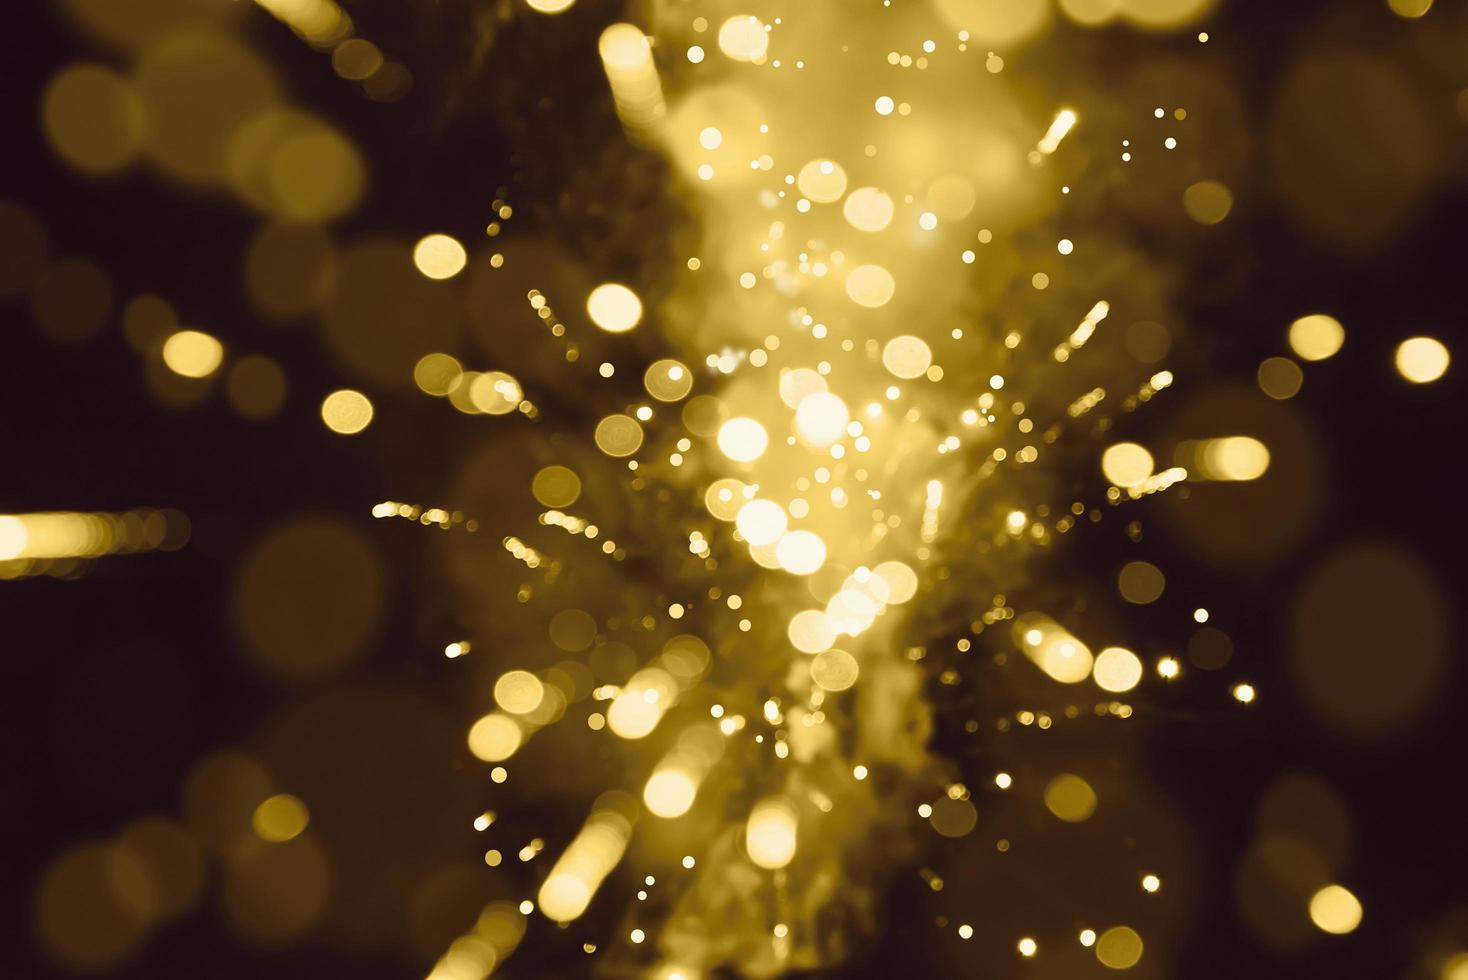 Abstract background. Gold-colored blur. Fireworks circle blur photo